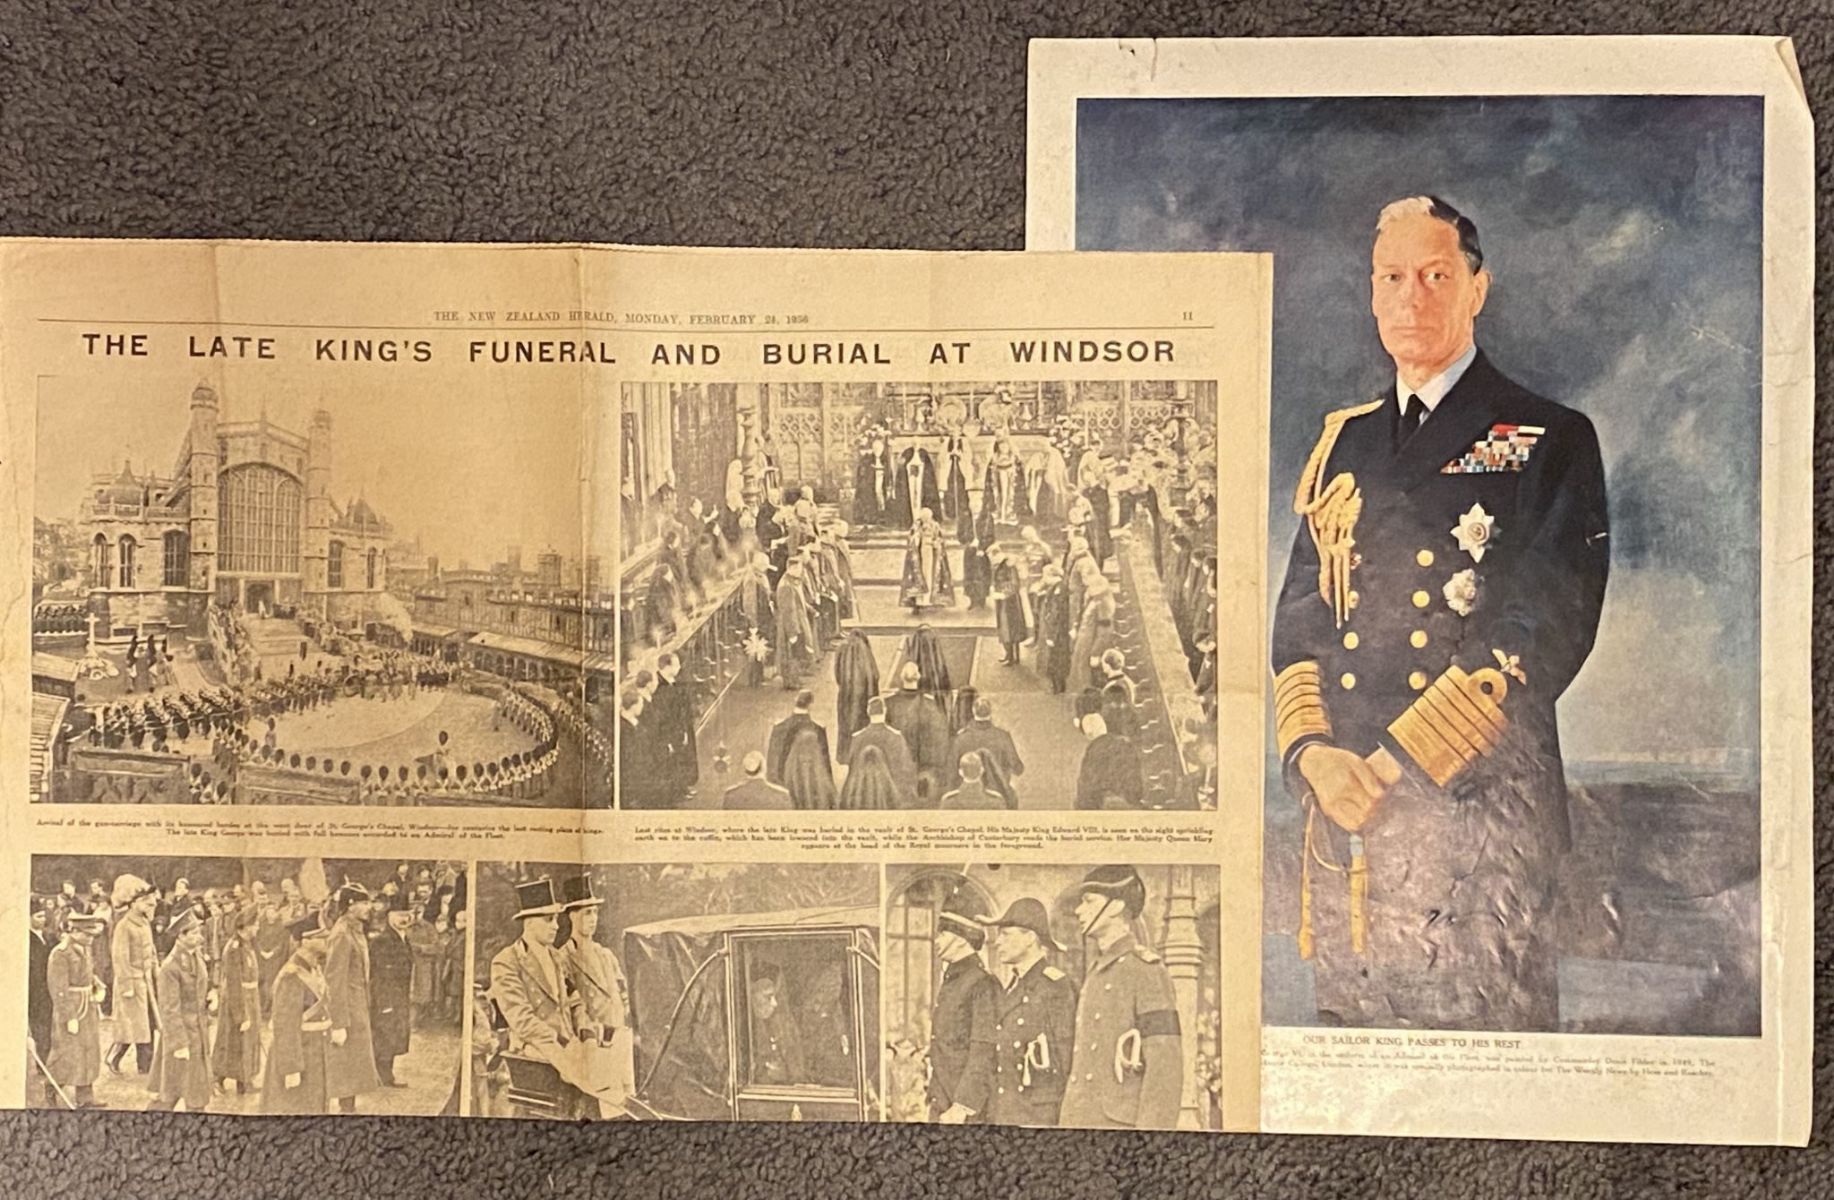 OLD NEWSPAPER + PORTRAIT: New Zealand Herald - The King's Funeral, 24 Feb 1936